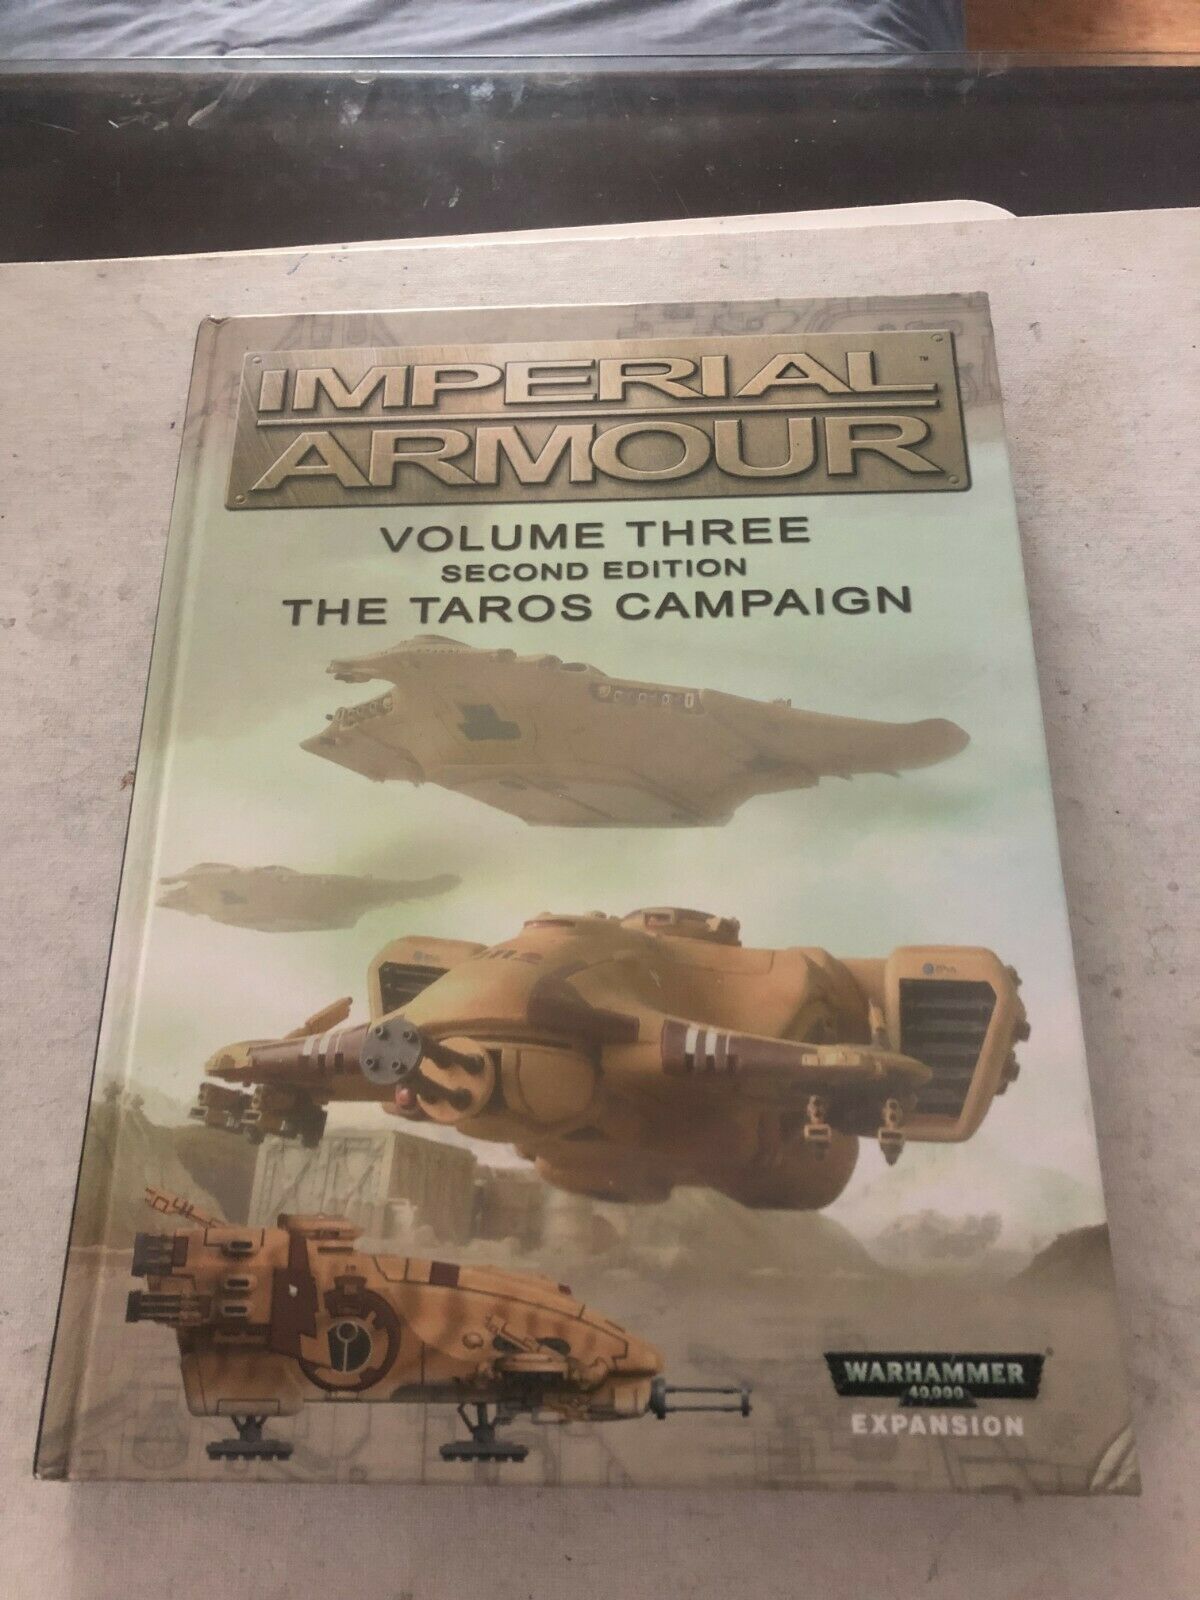 Warhammer 40k Imperial Armour The Taros Campaign Volume 3, 2nd Edition Hard Cvr